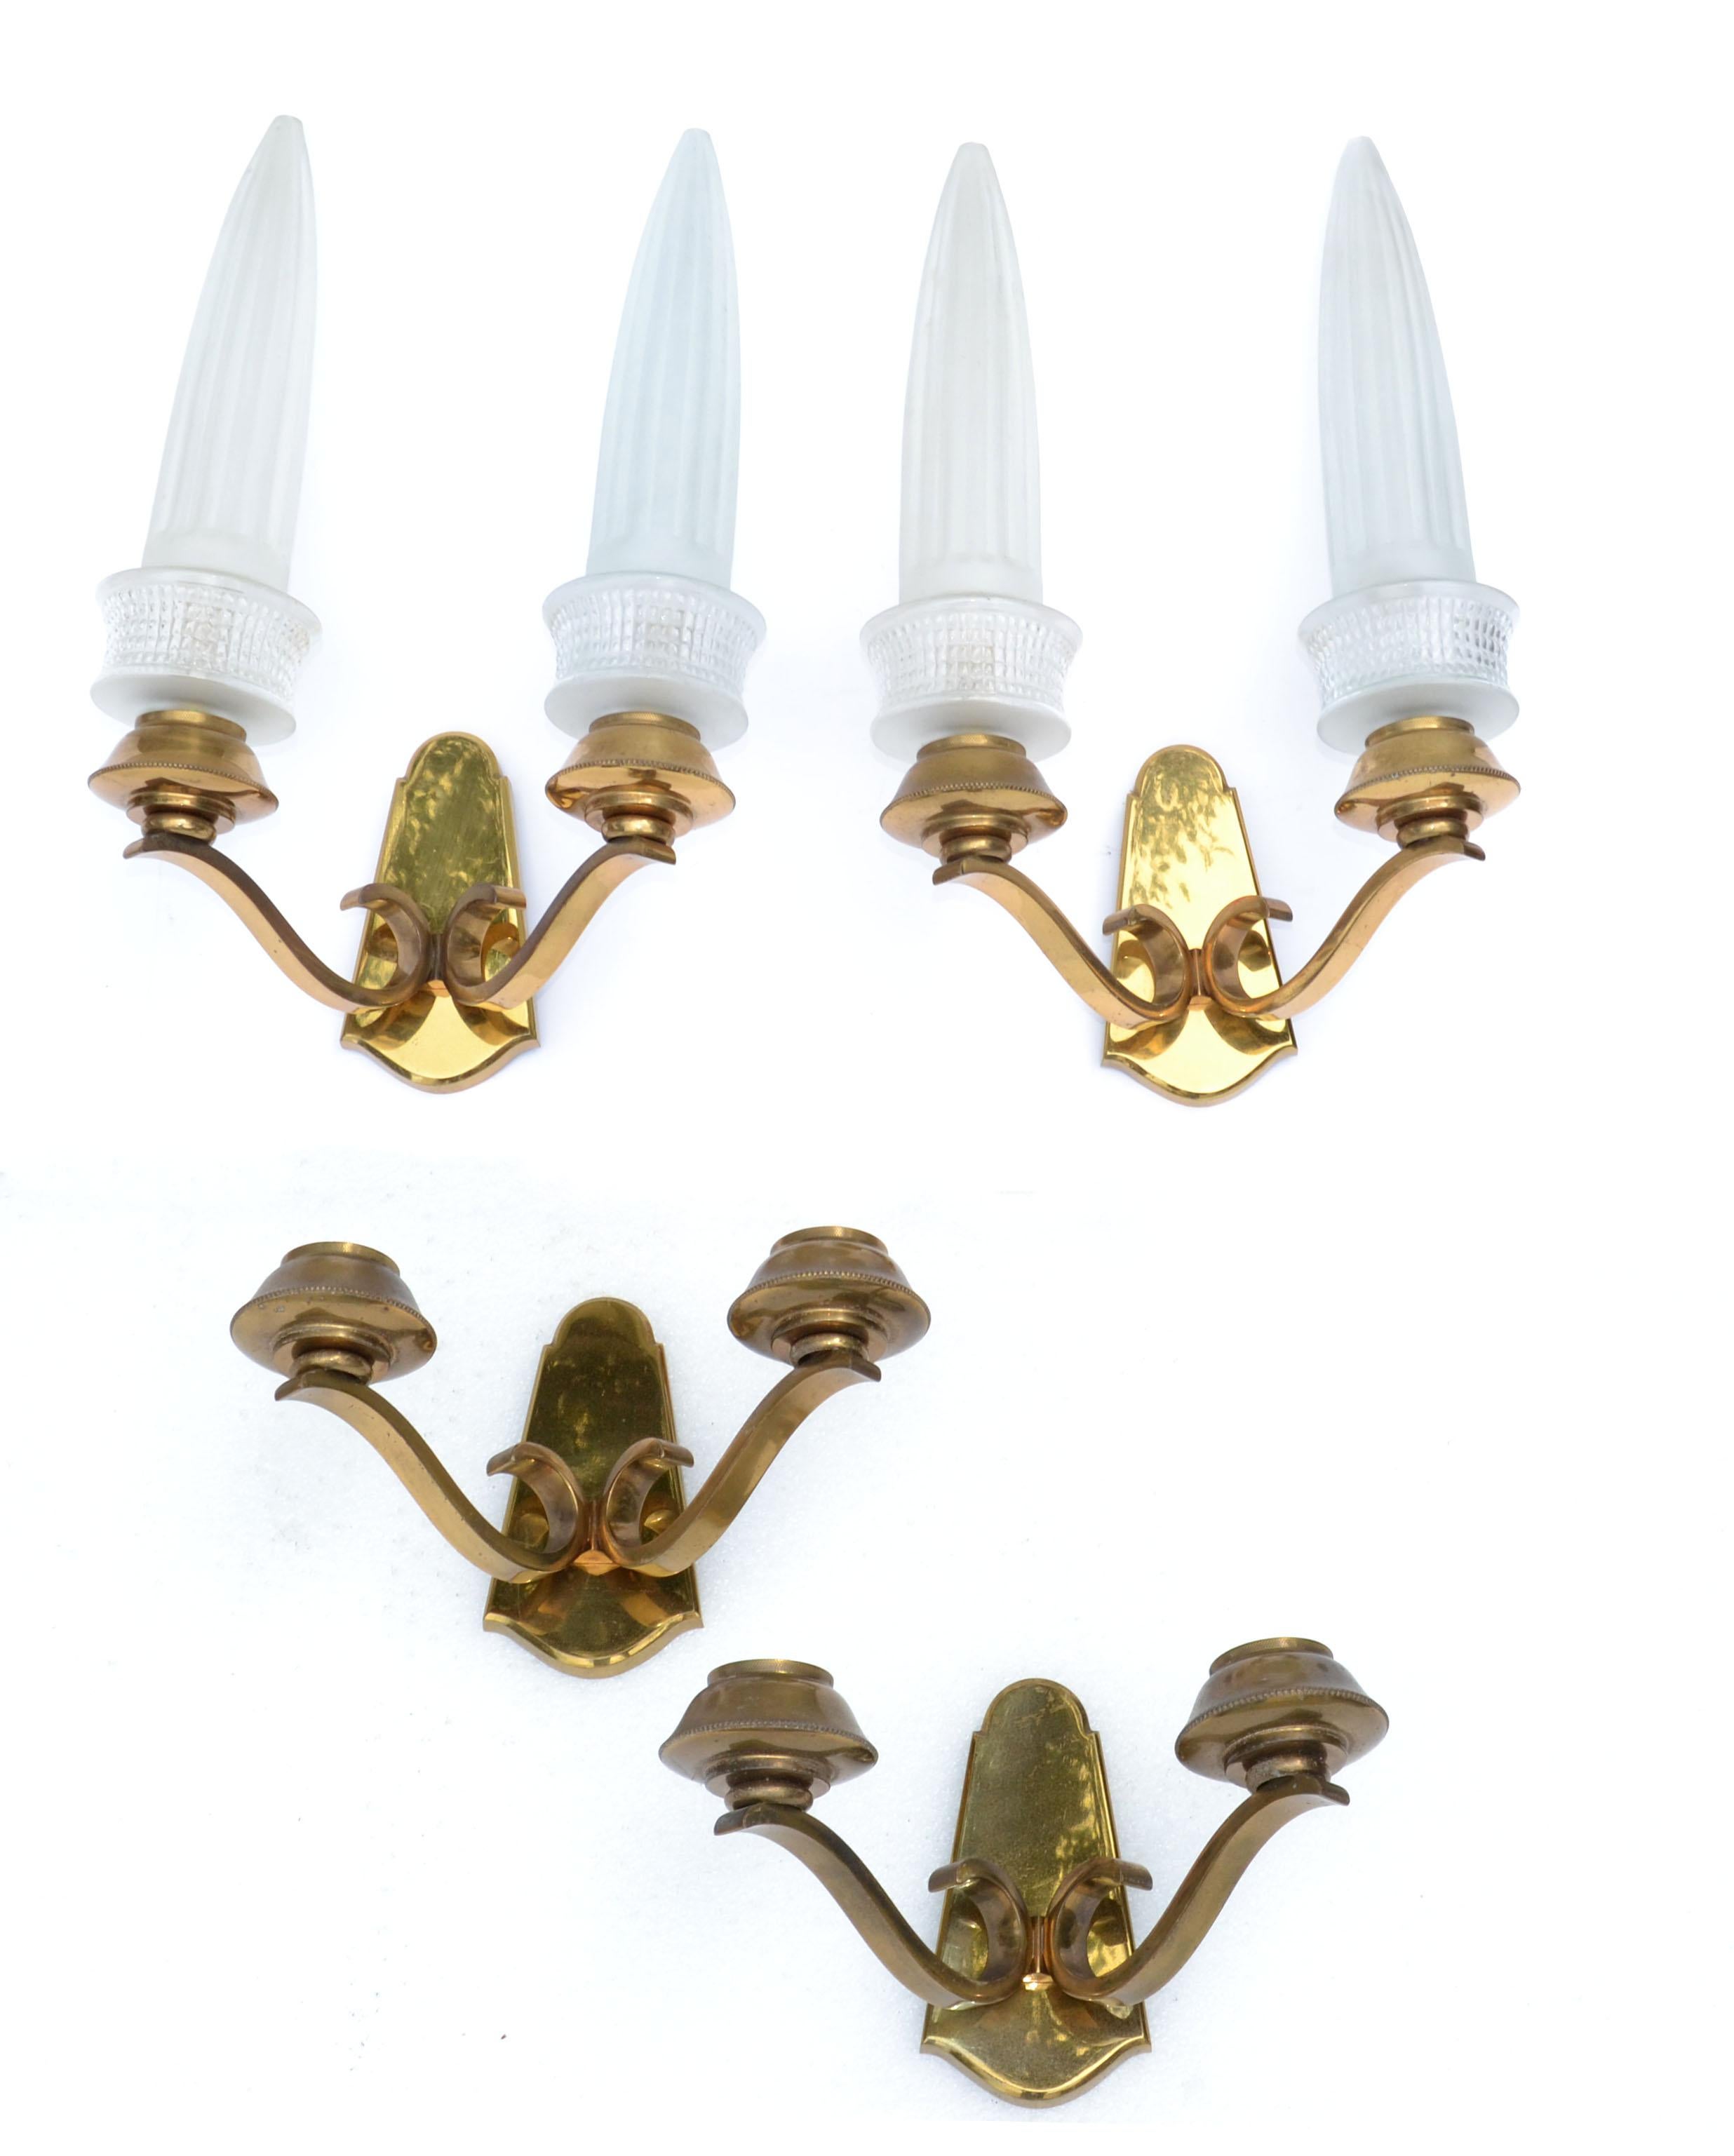 Classic and elegant Art Deco original Maison Liberos bronze sconces with the original glass shades made in Paris circa 1950s.
Stamped inside the Back Plate: Liberos Paris.
We have 4 Sconces available, priced by pair.
Working condition and each